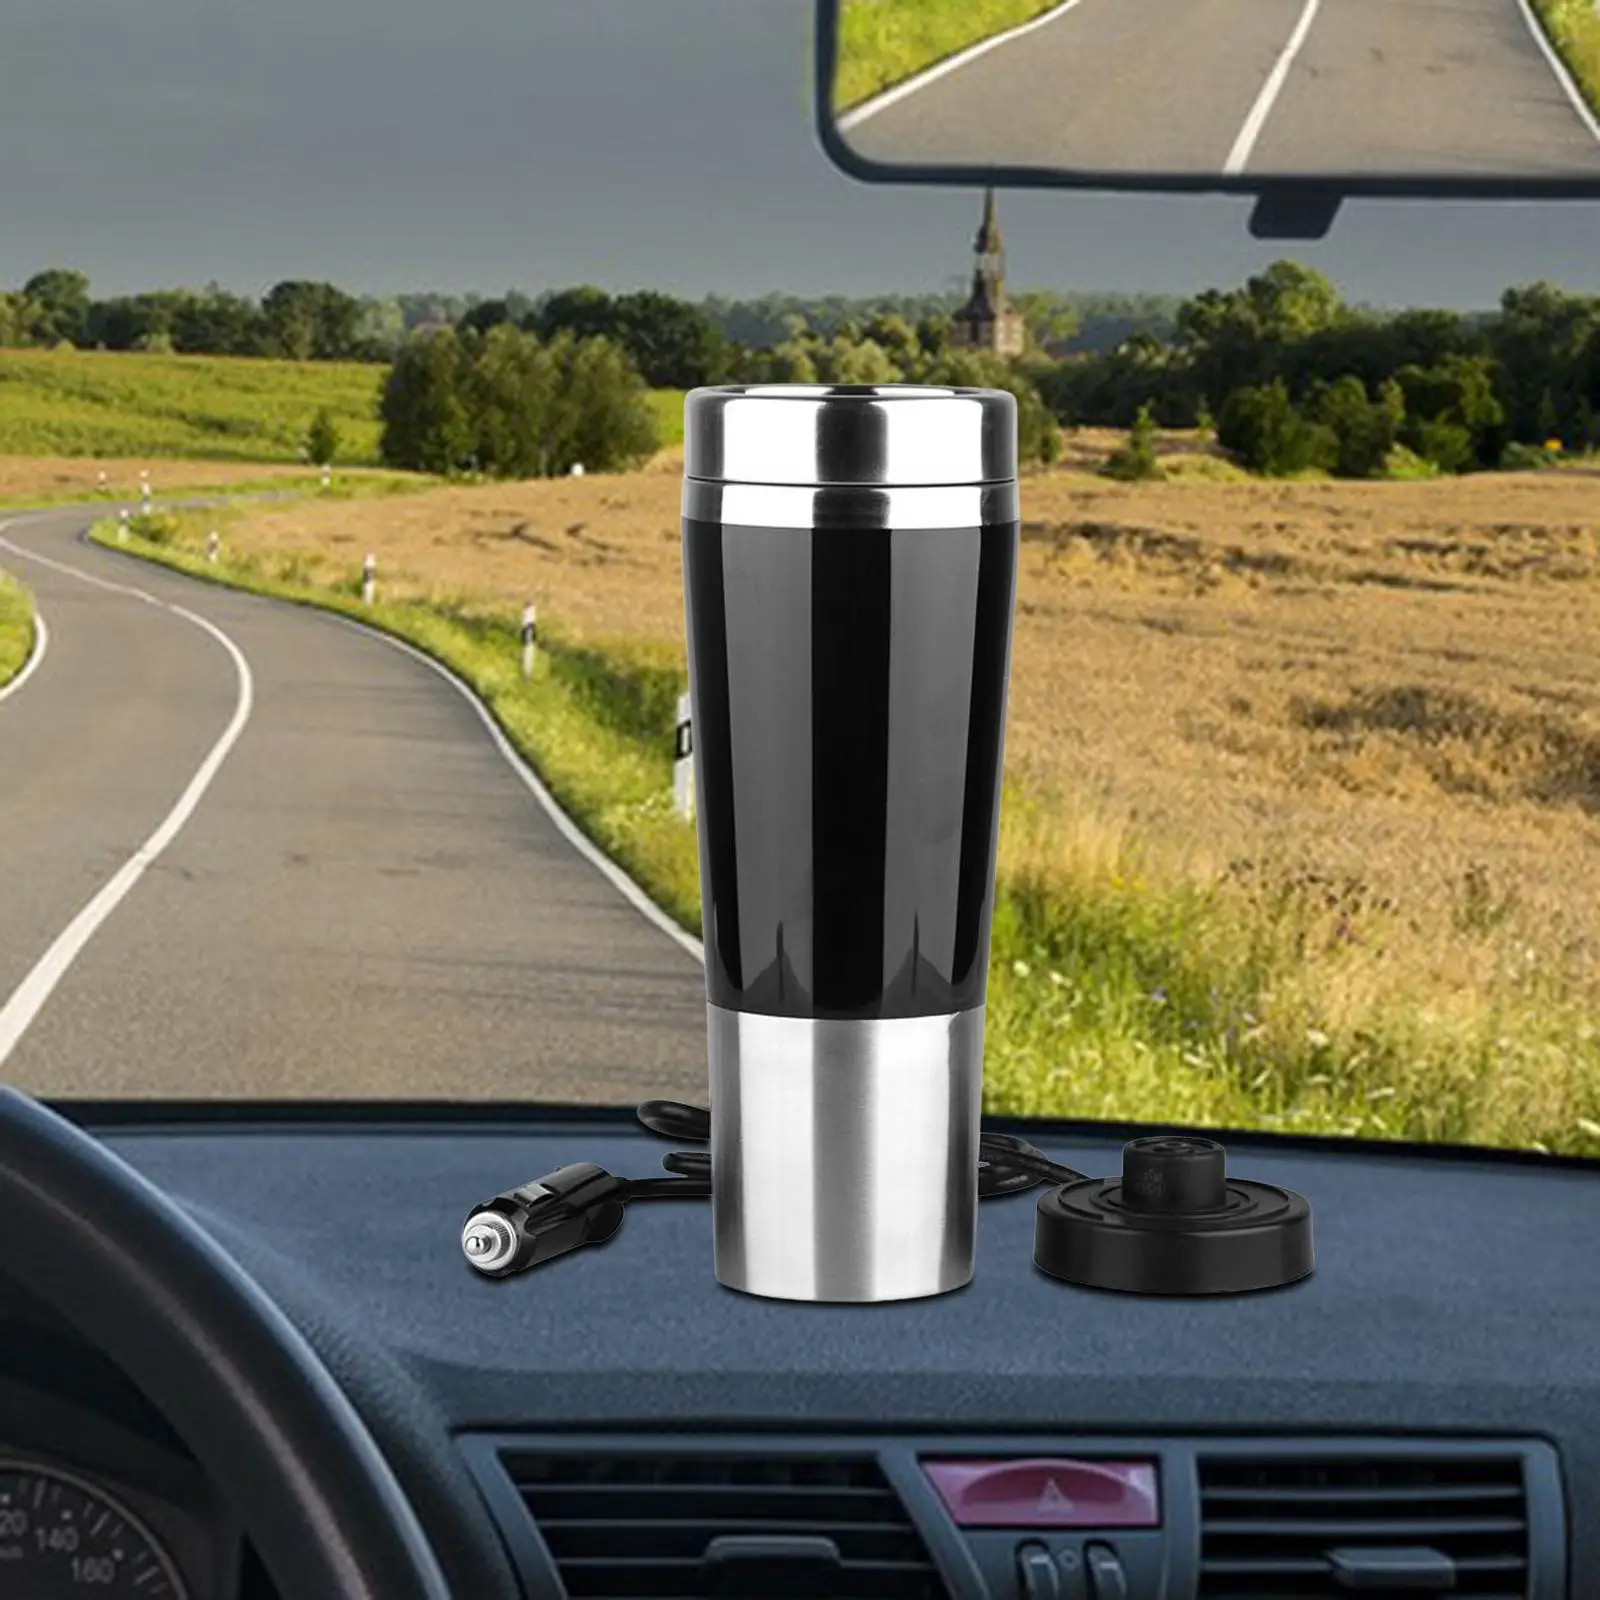 Portable 12V Car Kettle Boiler Warmer Heating Stainless Steel Hot Water Kettle Mug Heater Cup for Tea Coffee Outdoor Travel